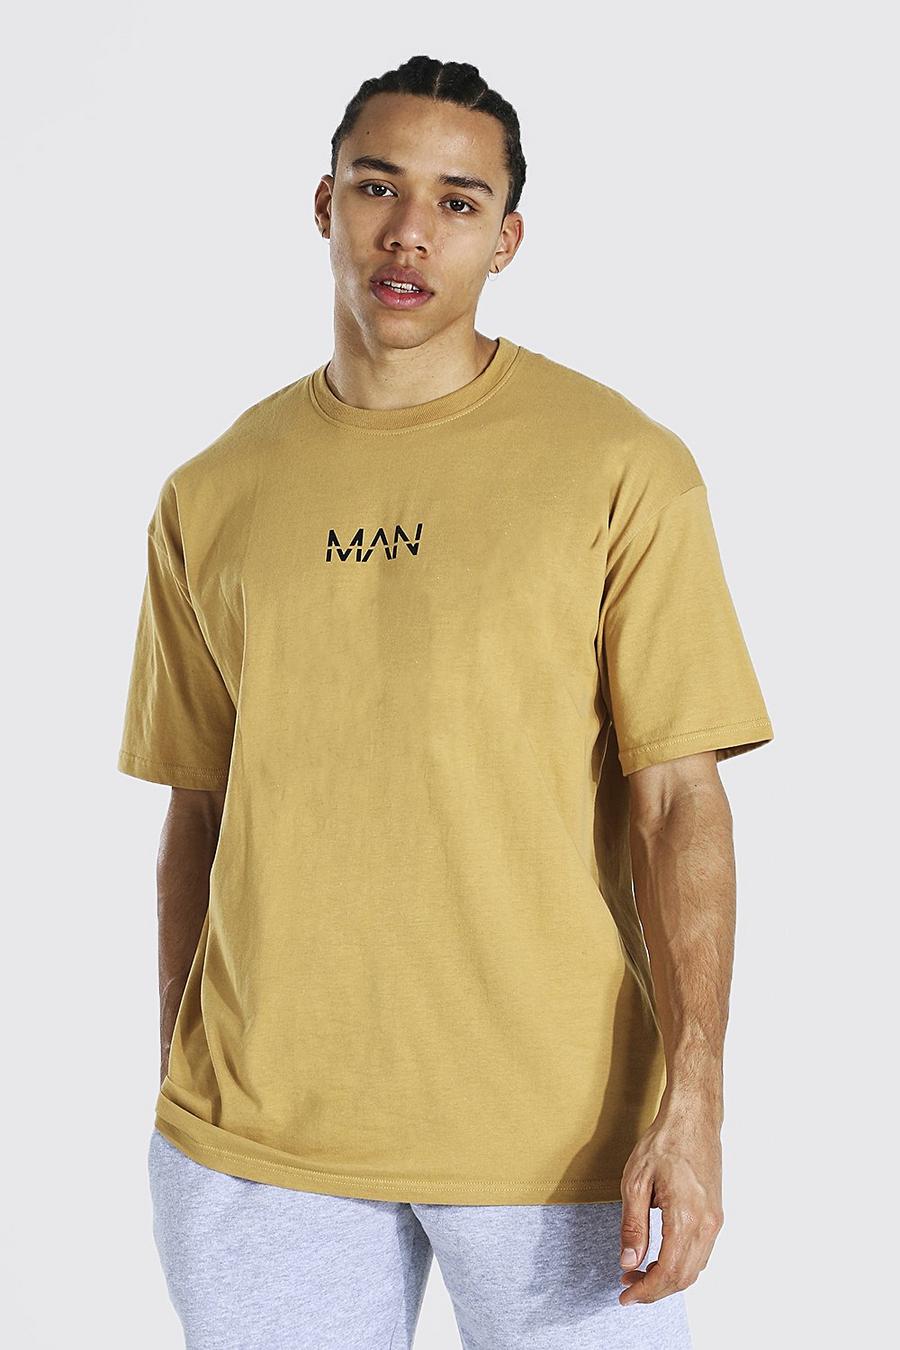 Sand Tall Oversized Man T-Shirt image number 1